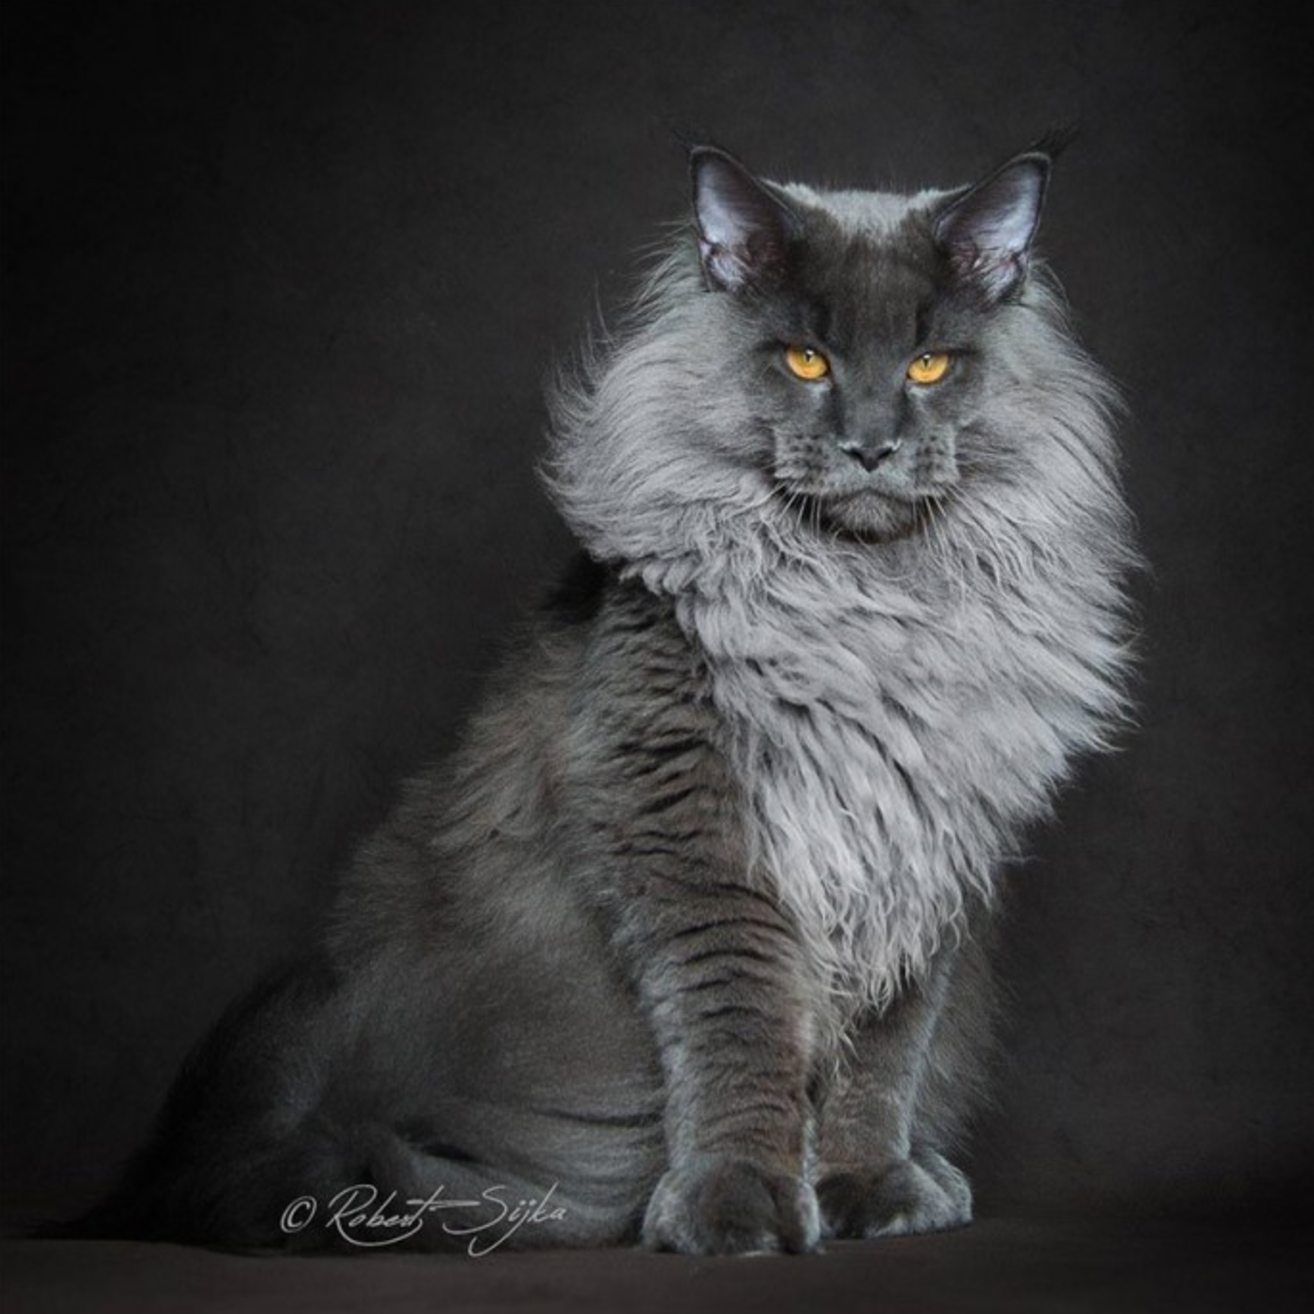 16 Maine Coon Cats That Look Like Majestic Mythical Creatures – Meowingtons